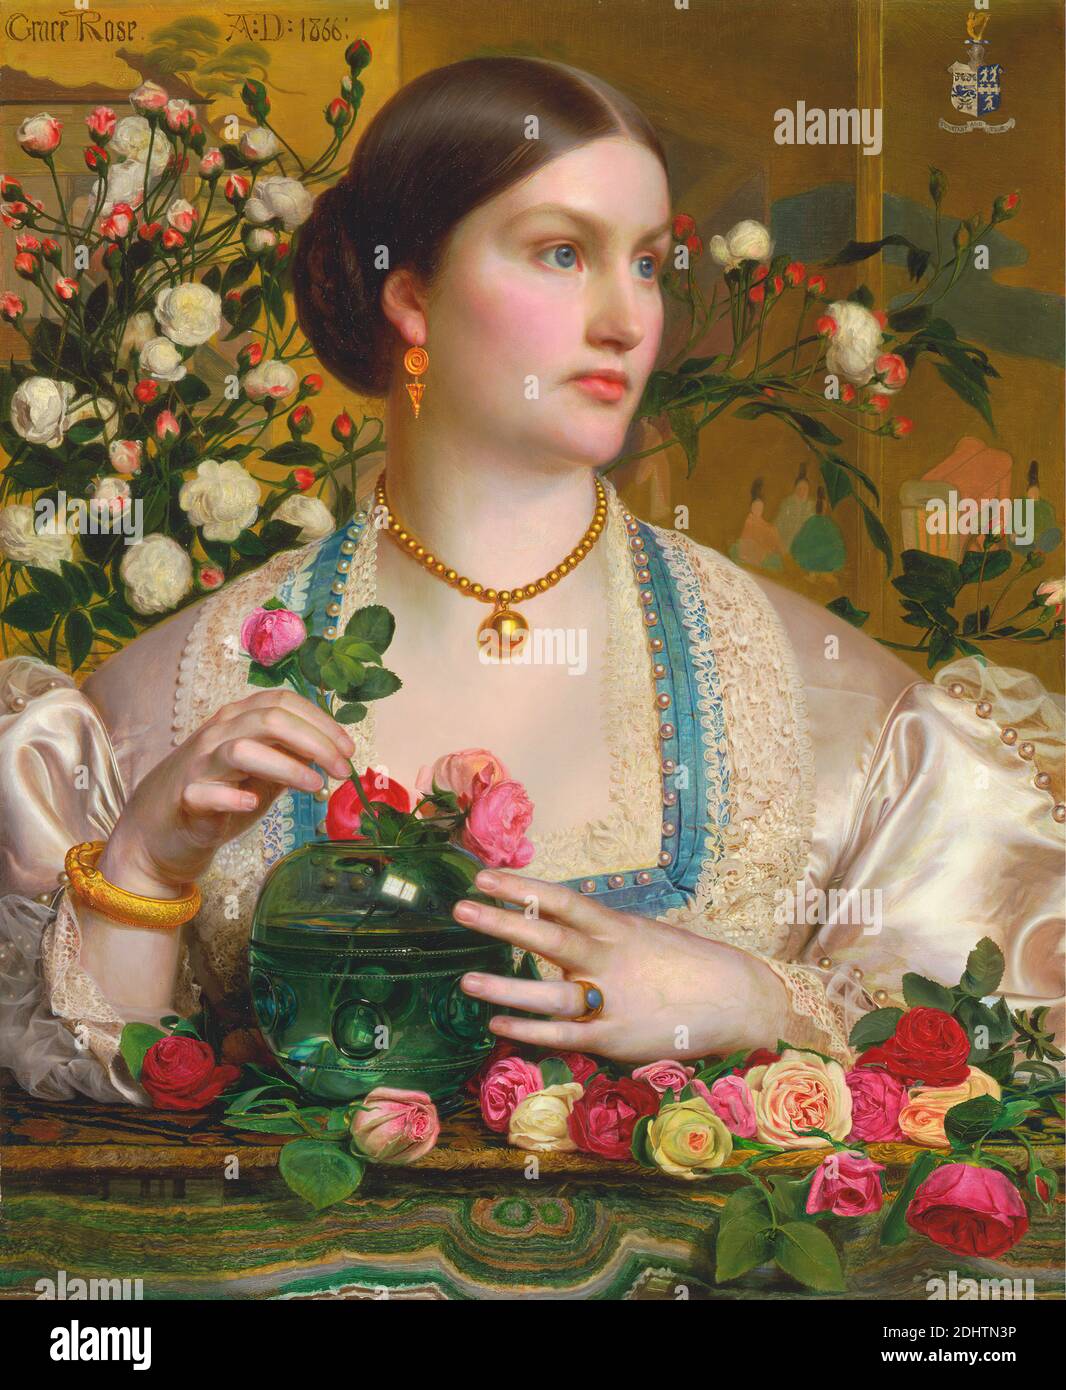 Grace Rose, Frederick Sandys, 1829–1904, British, 1866, Oil on panel, Support (PTG): 22 x 17 7/8 inches (55.9 x 45.4 cm), botany, bracelet, coat of arms, collar, costume, crest, decorative, earrings, figures, flowers (plants), Japanese, jewels, leaves, necklace, painting (visual work), pearls, portrait, ring, roses (plant), science, smooth, vase, Victorian, woman Stock Photo